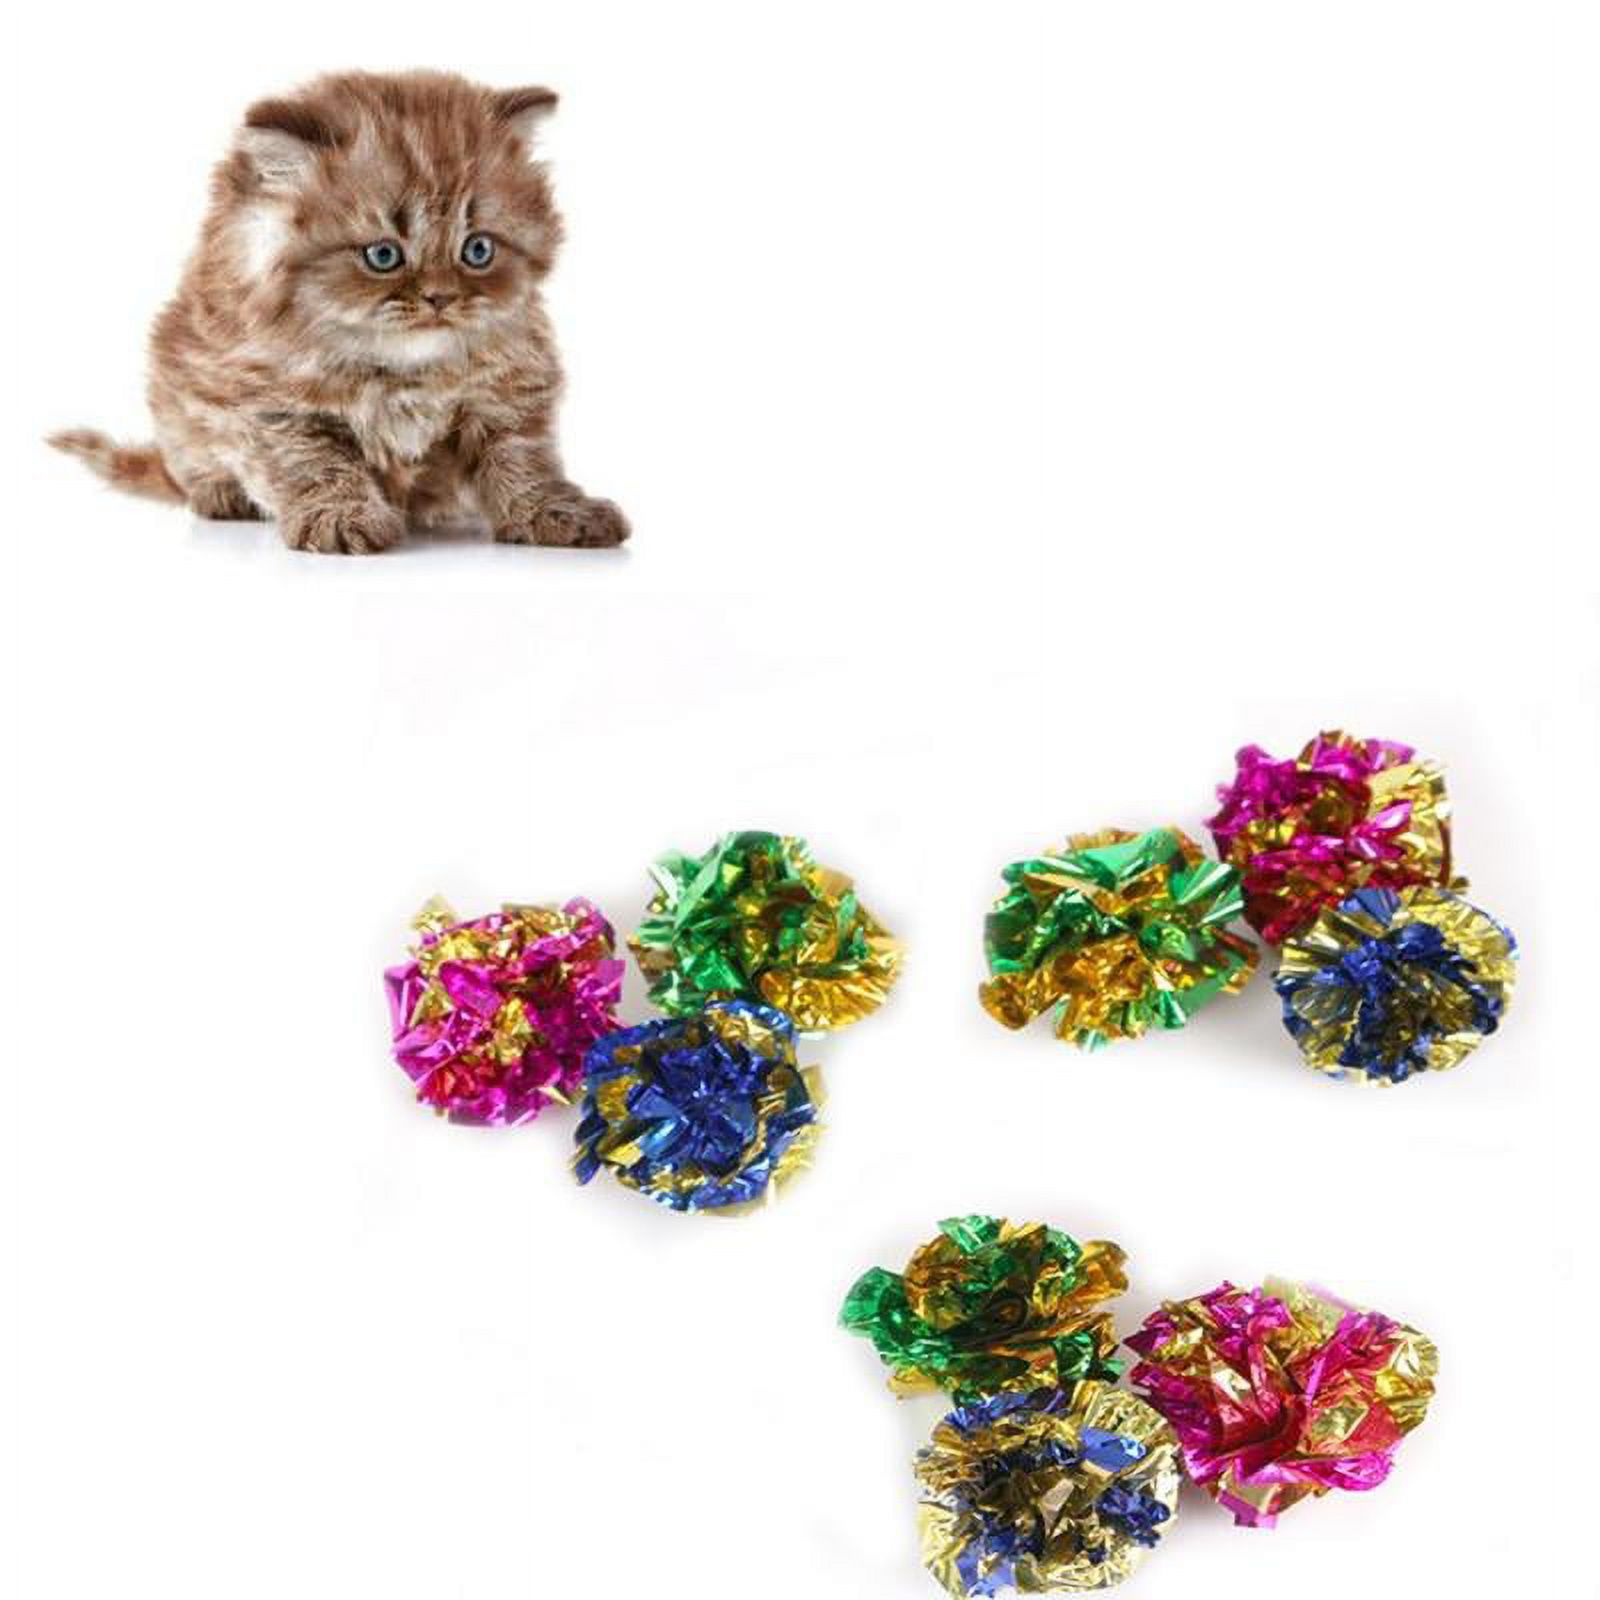 Pack of 12 Colorful Crinkle Foil Balls -Cat Interactive Toy Cat Sound Paper Mylar Balls - image 4 of 6